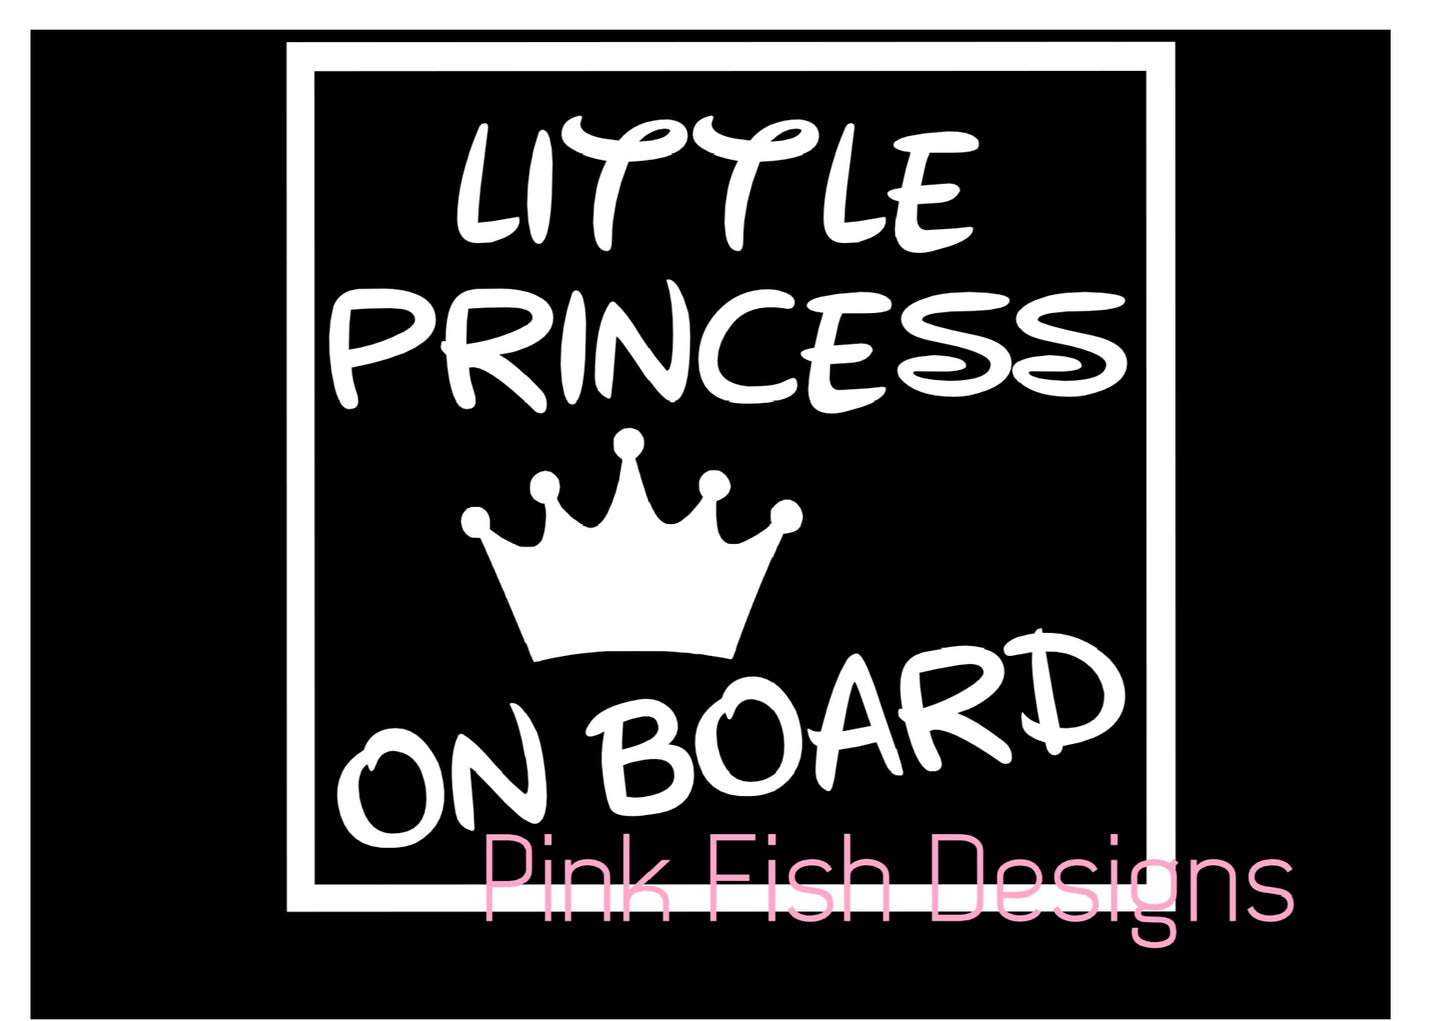 LITTLE PRINCESS ON BOARD SIGN